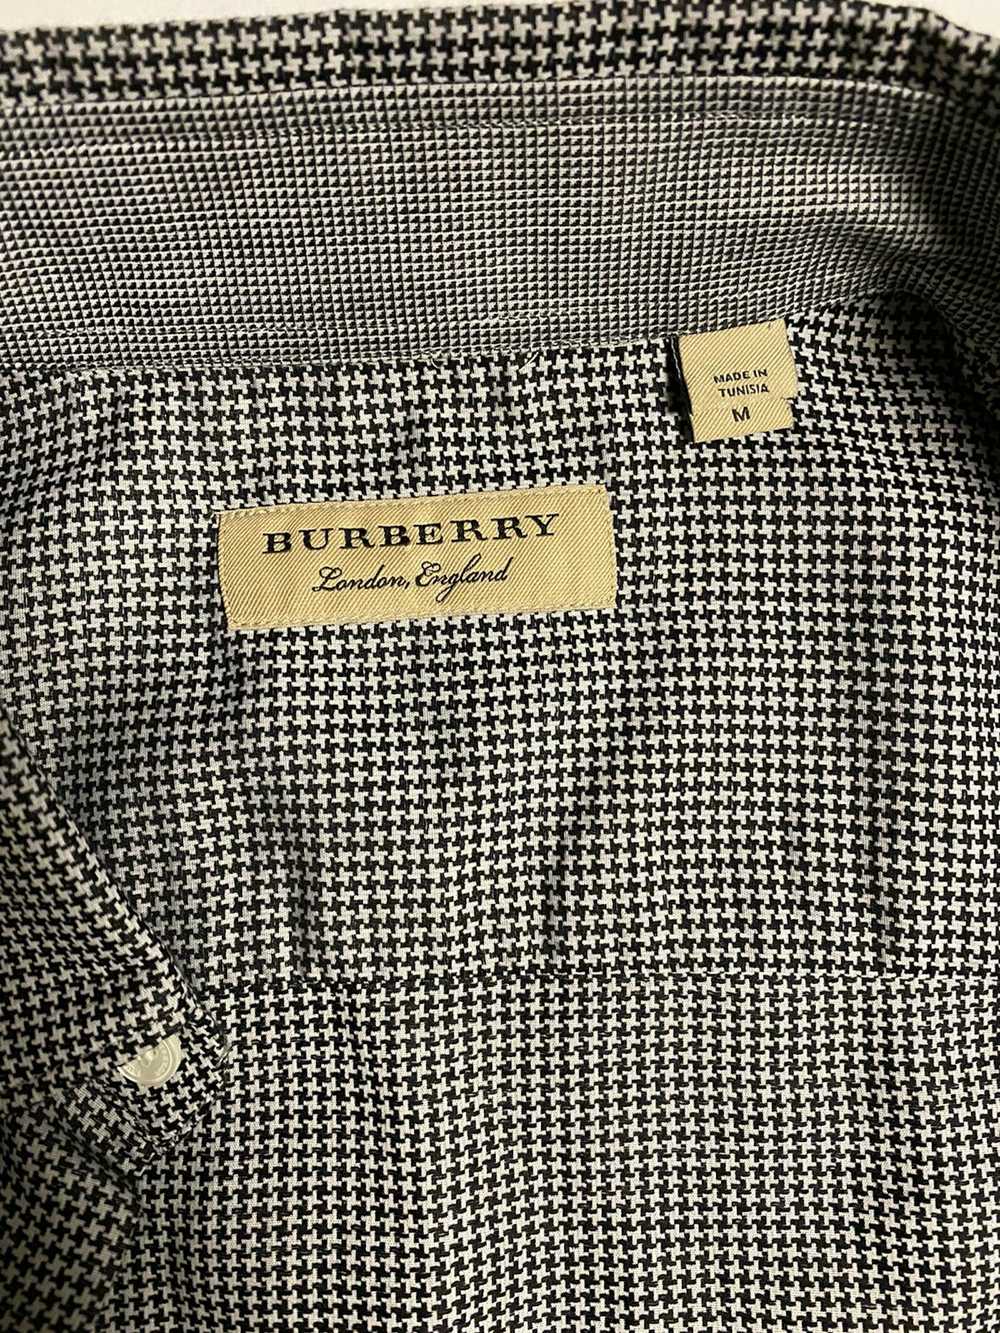 Burberry Burberry Button Up, Mint Condition - image 2